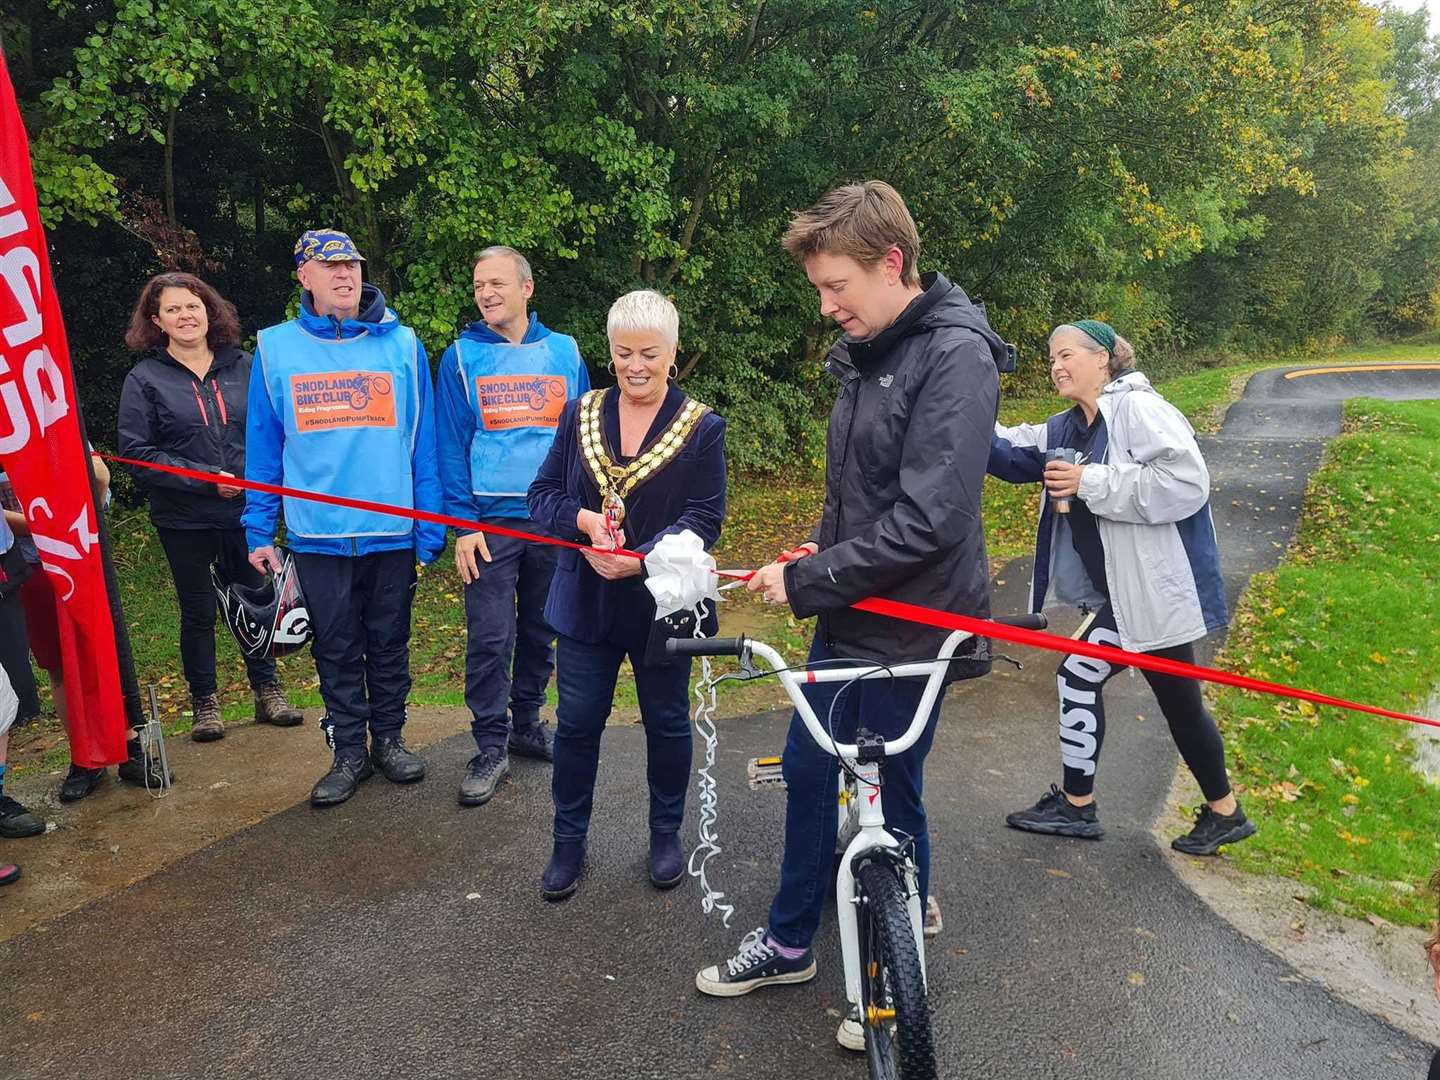 MP Tracey Crouch and Mayor Sue Bell performed the ribbon cutting ceremony at the new pump track in Snodland. Picture: Snodland Town Council